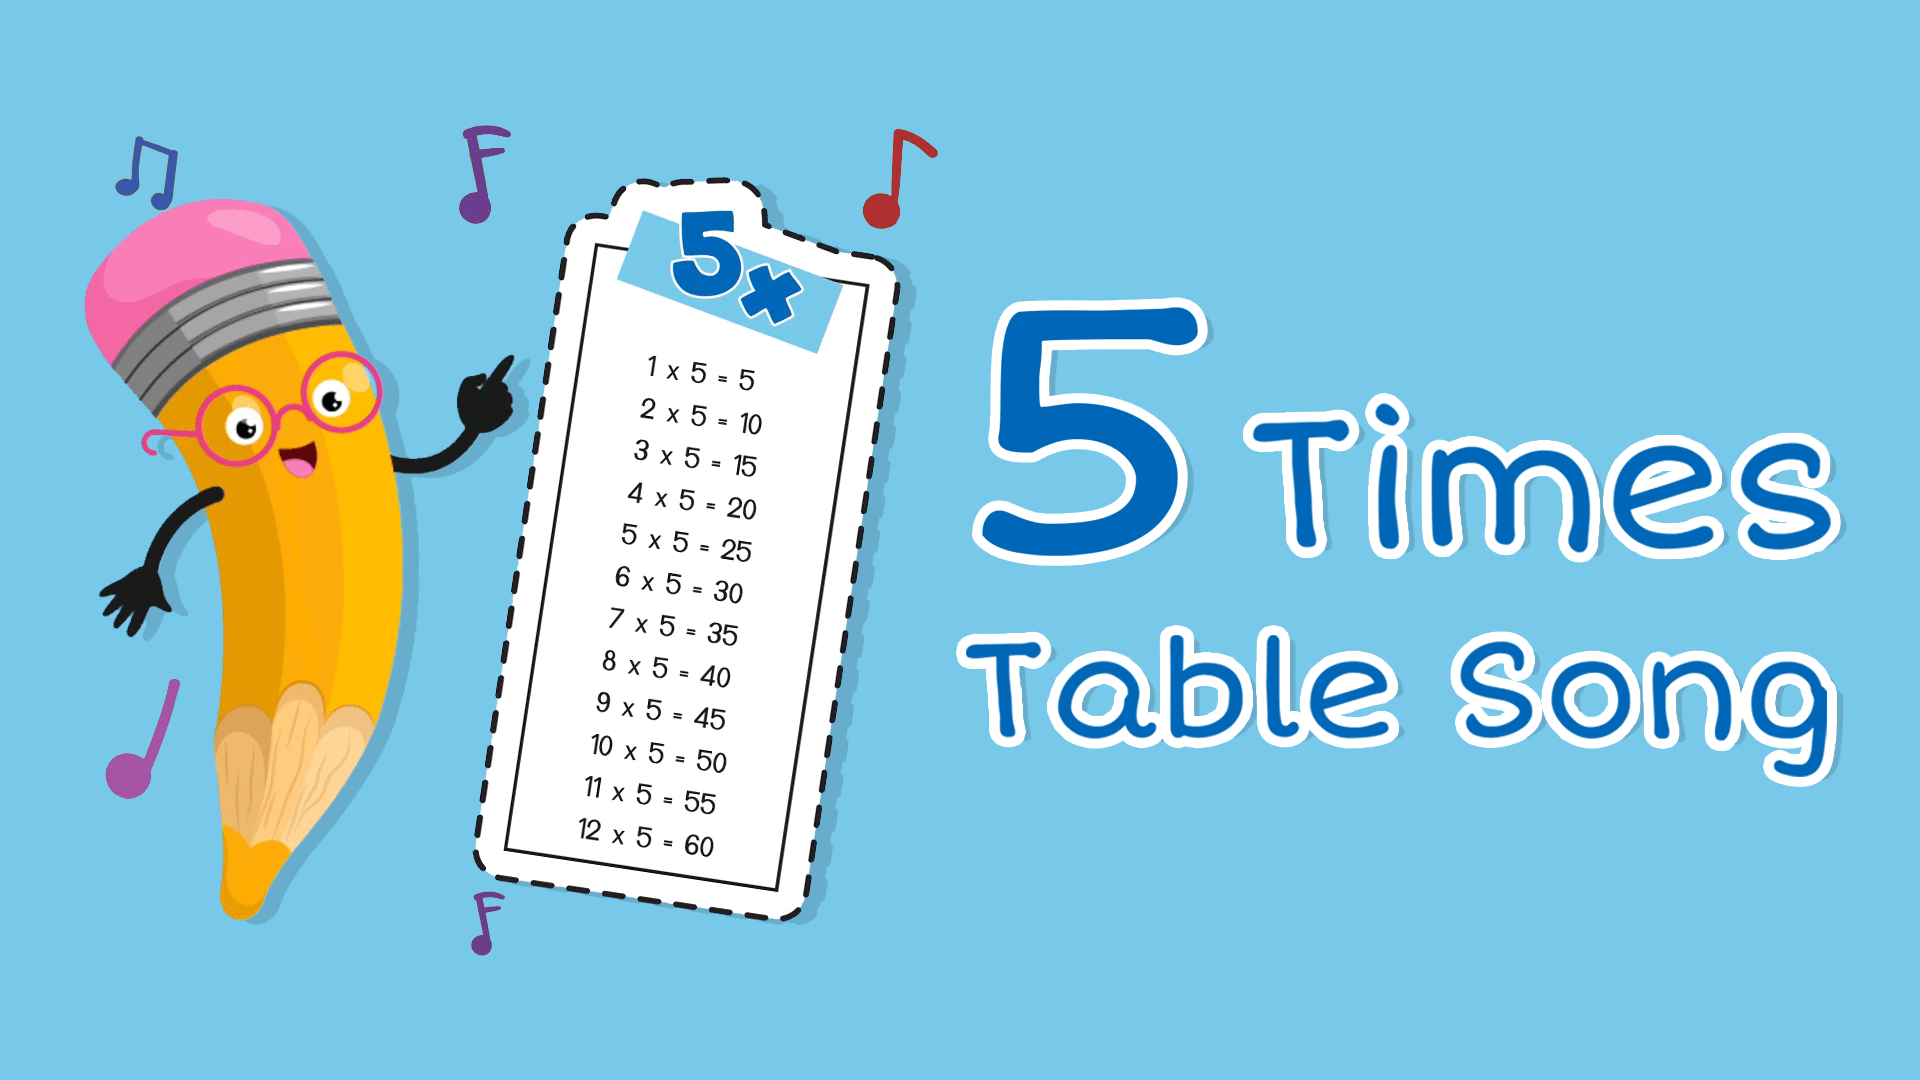 5 Times Table - Learn Table of 5